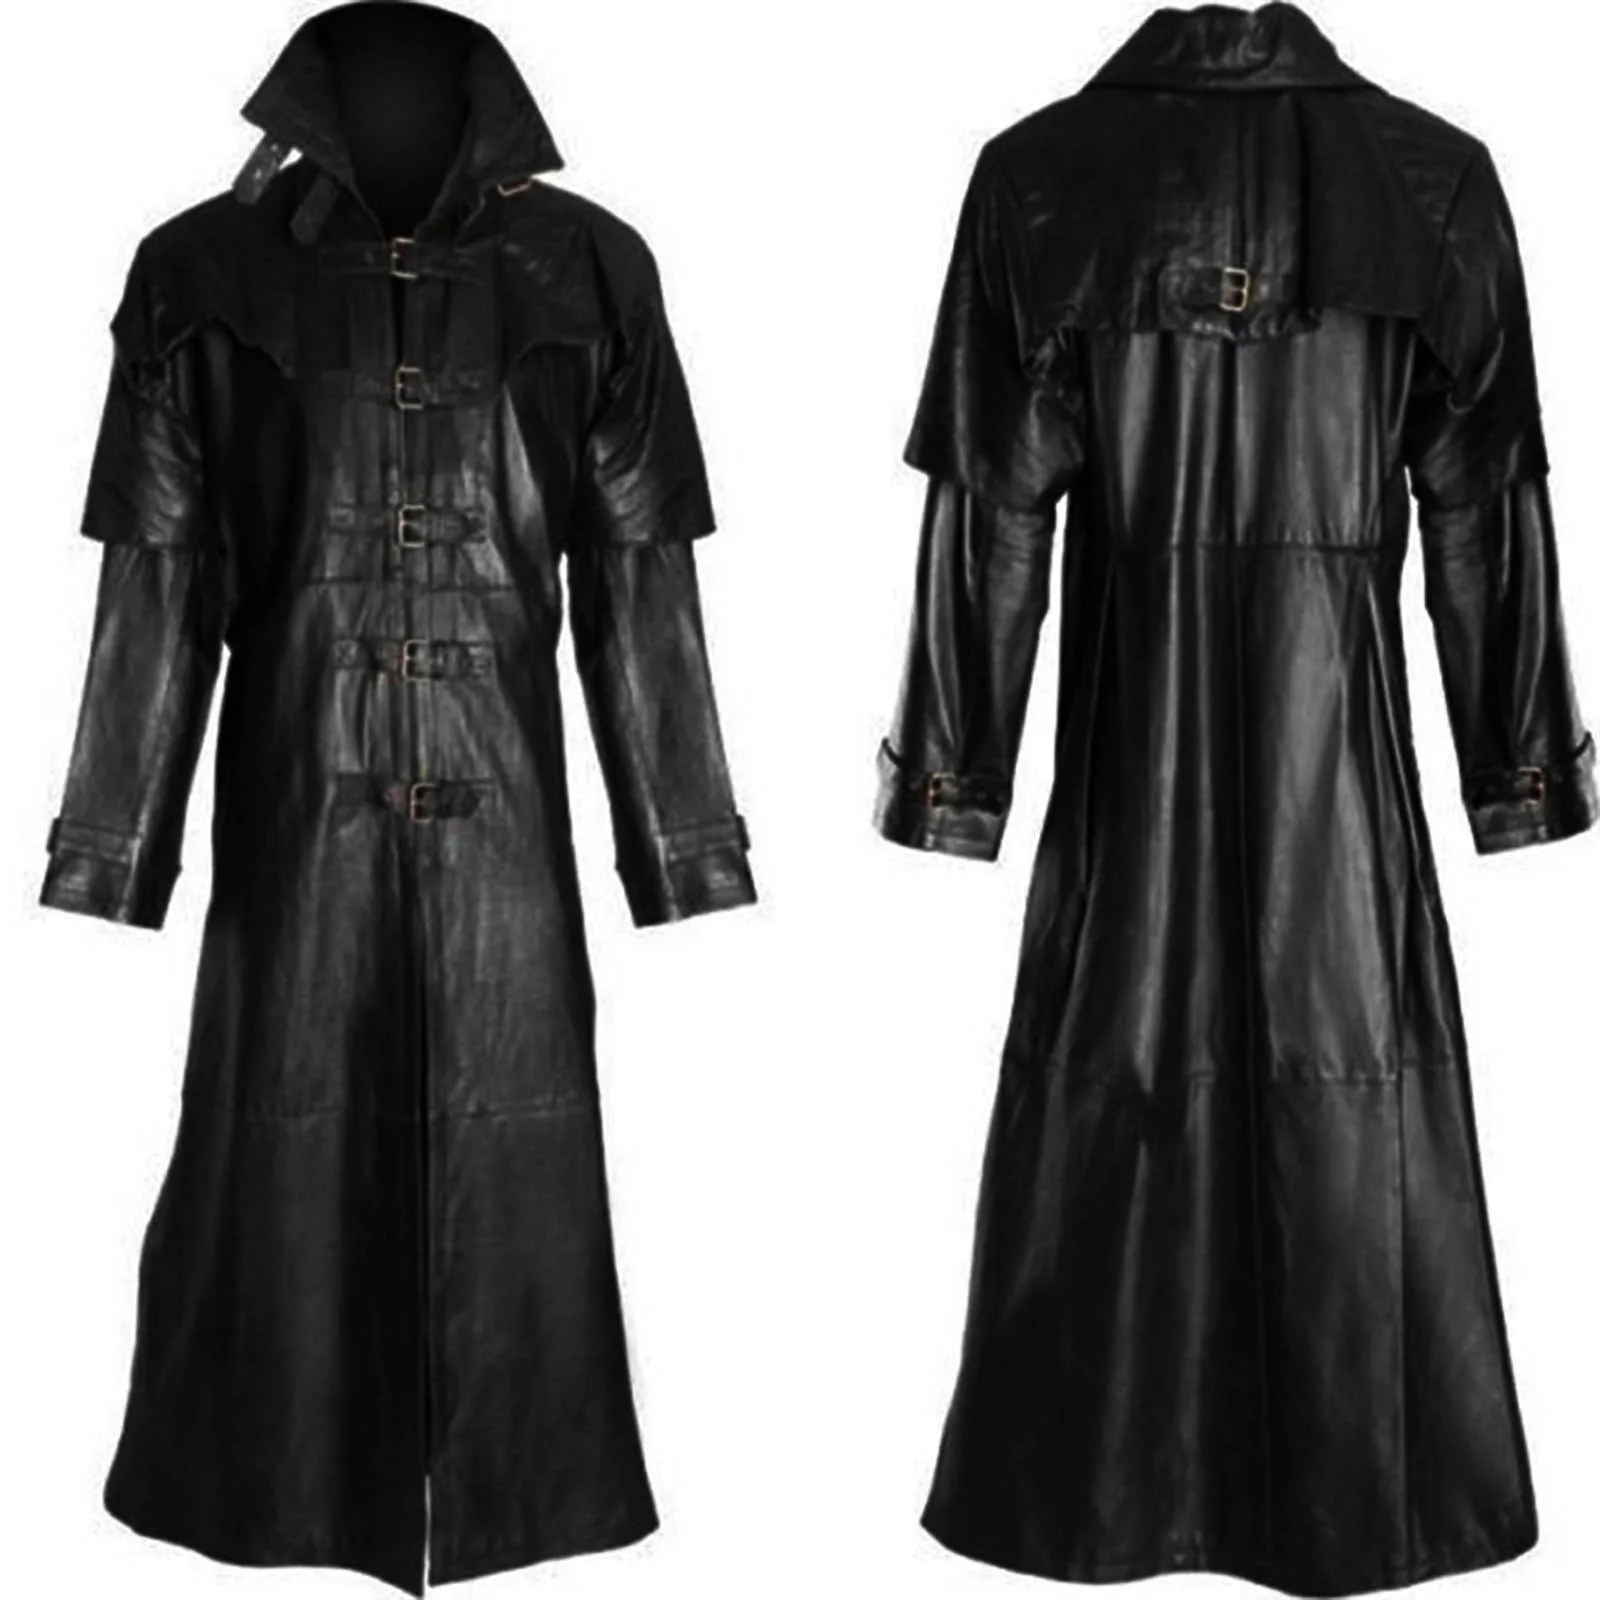 

PU Jacket for Man Mens Fashion Gothic Long Coat Leather Coat Faux Leather Mens Cold Weather Fleece Jacket Tan Fleece Jacket Men